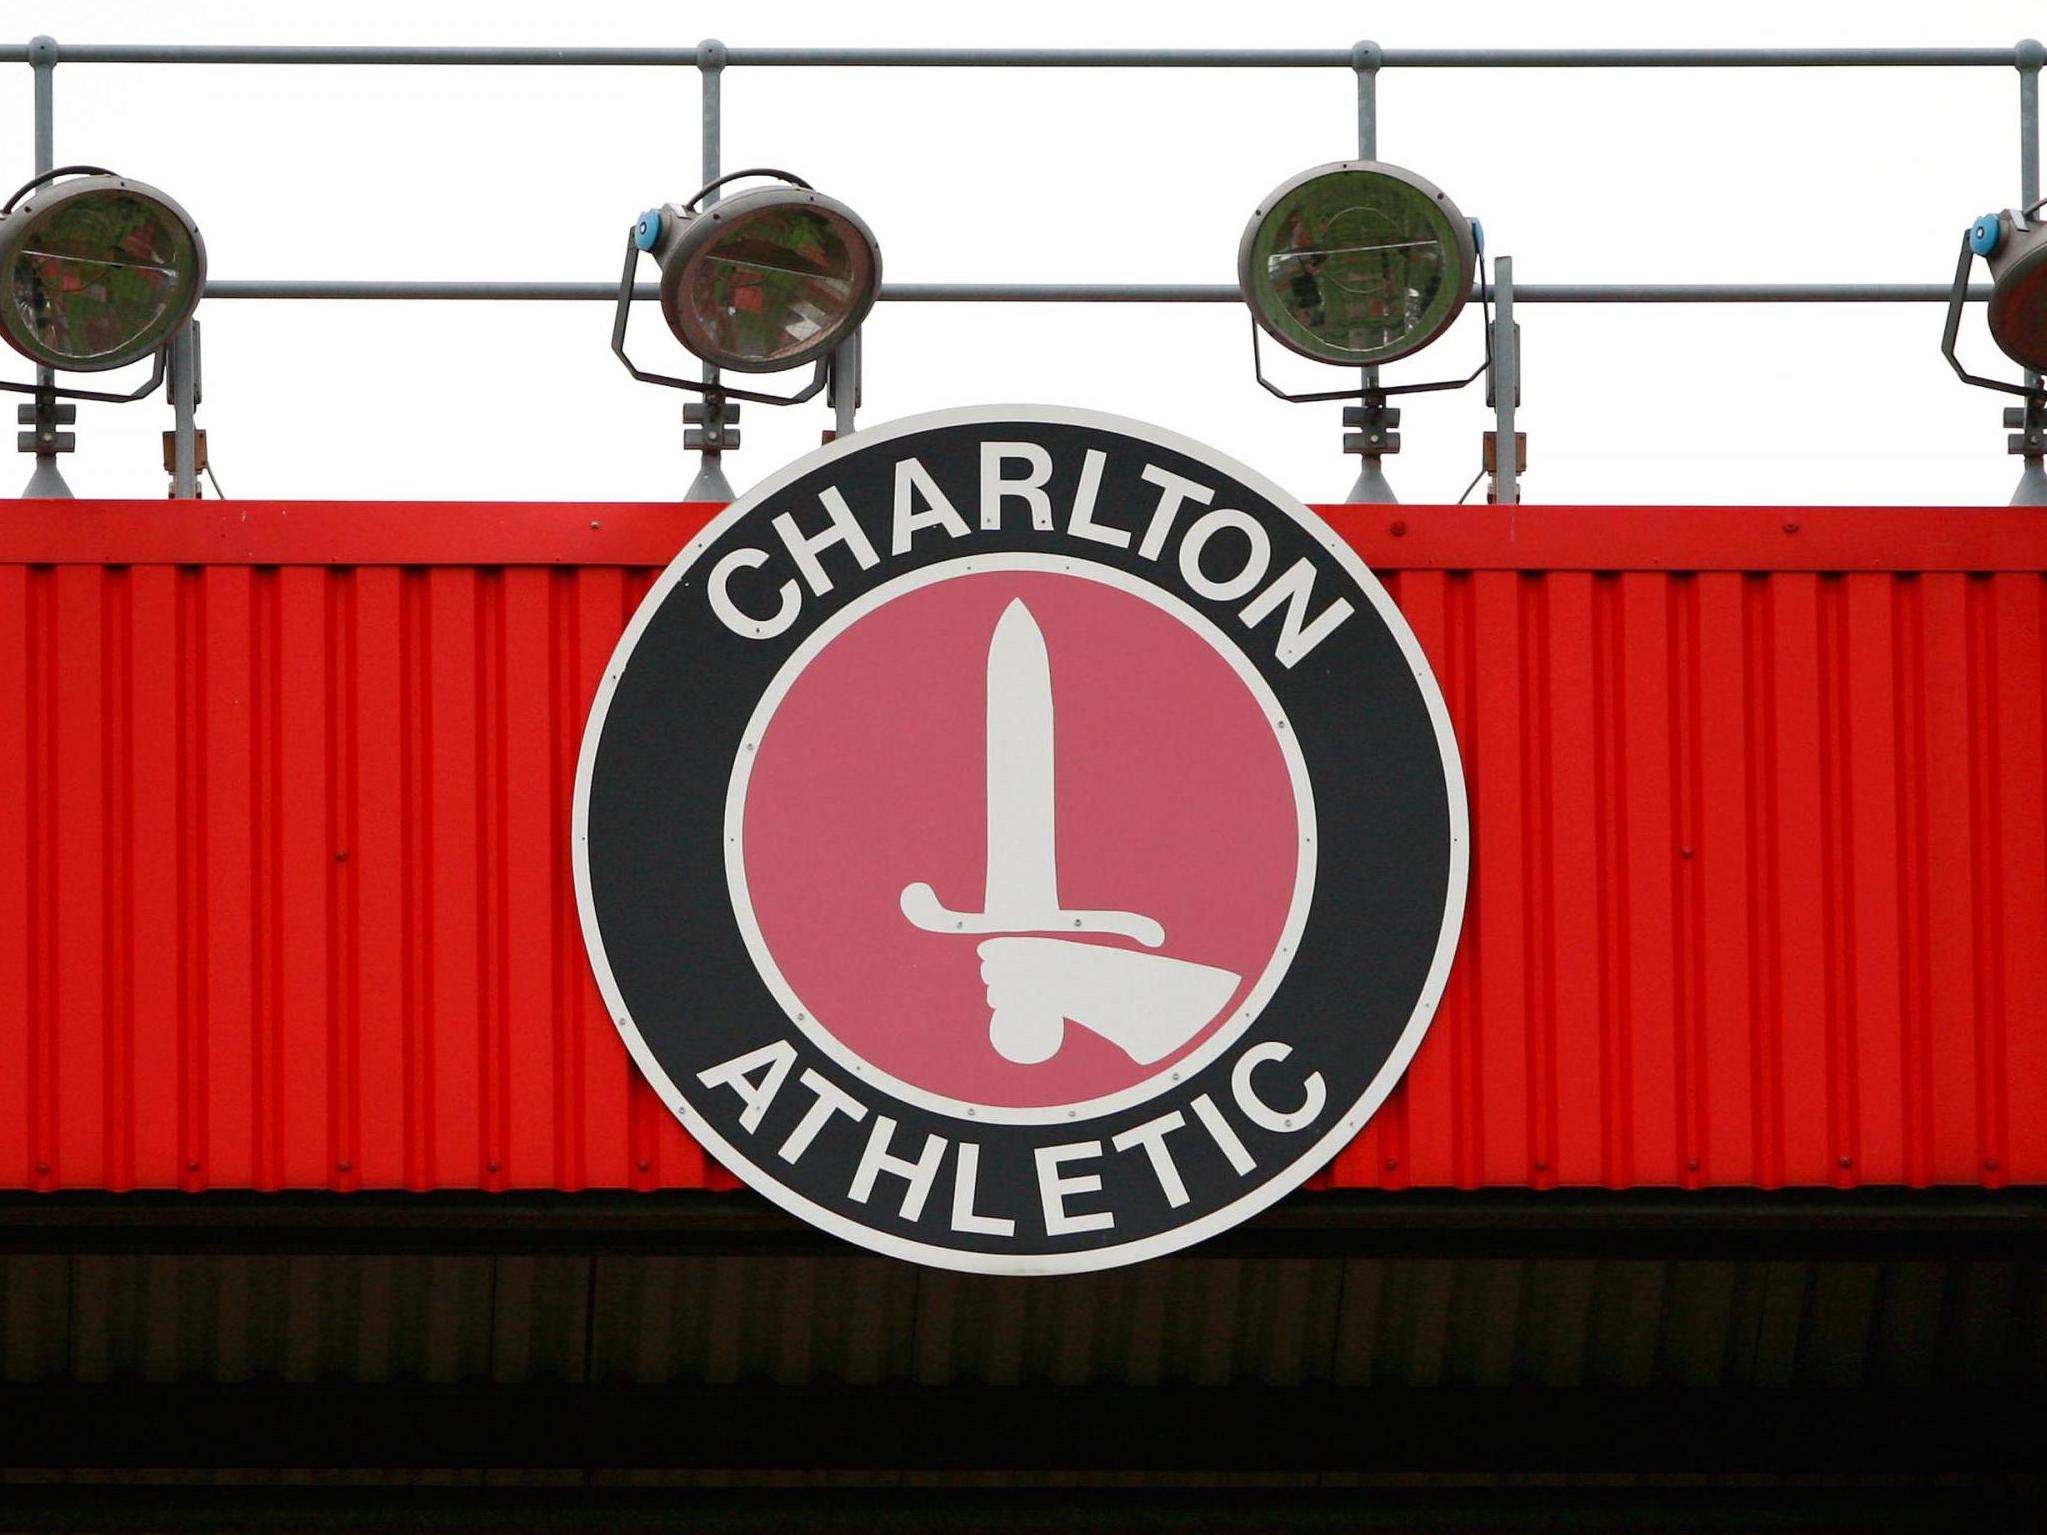 Charlton are embroiled in another ugly boardroom battle